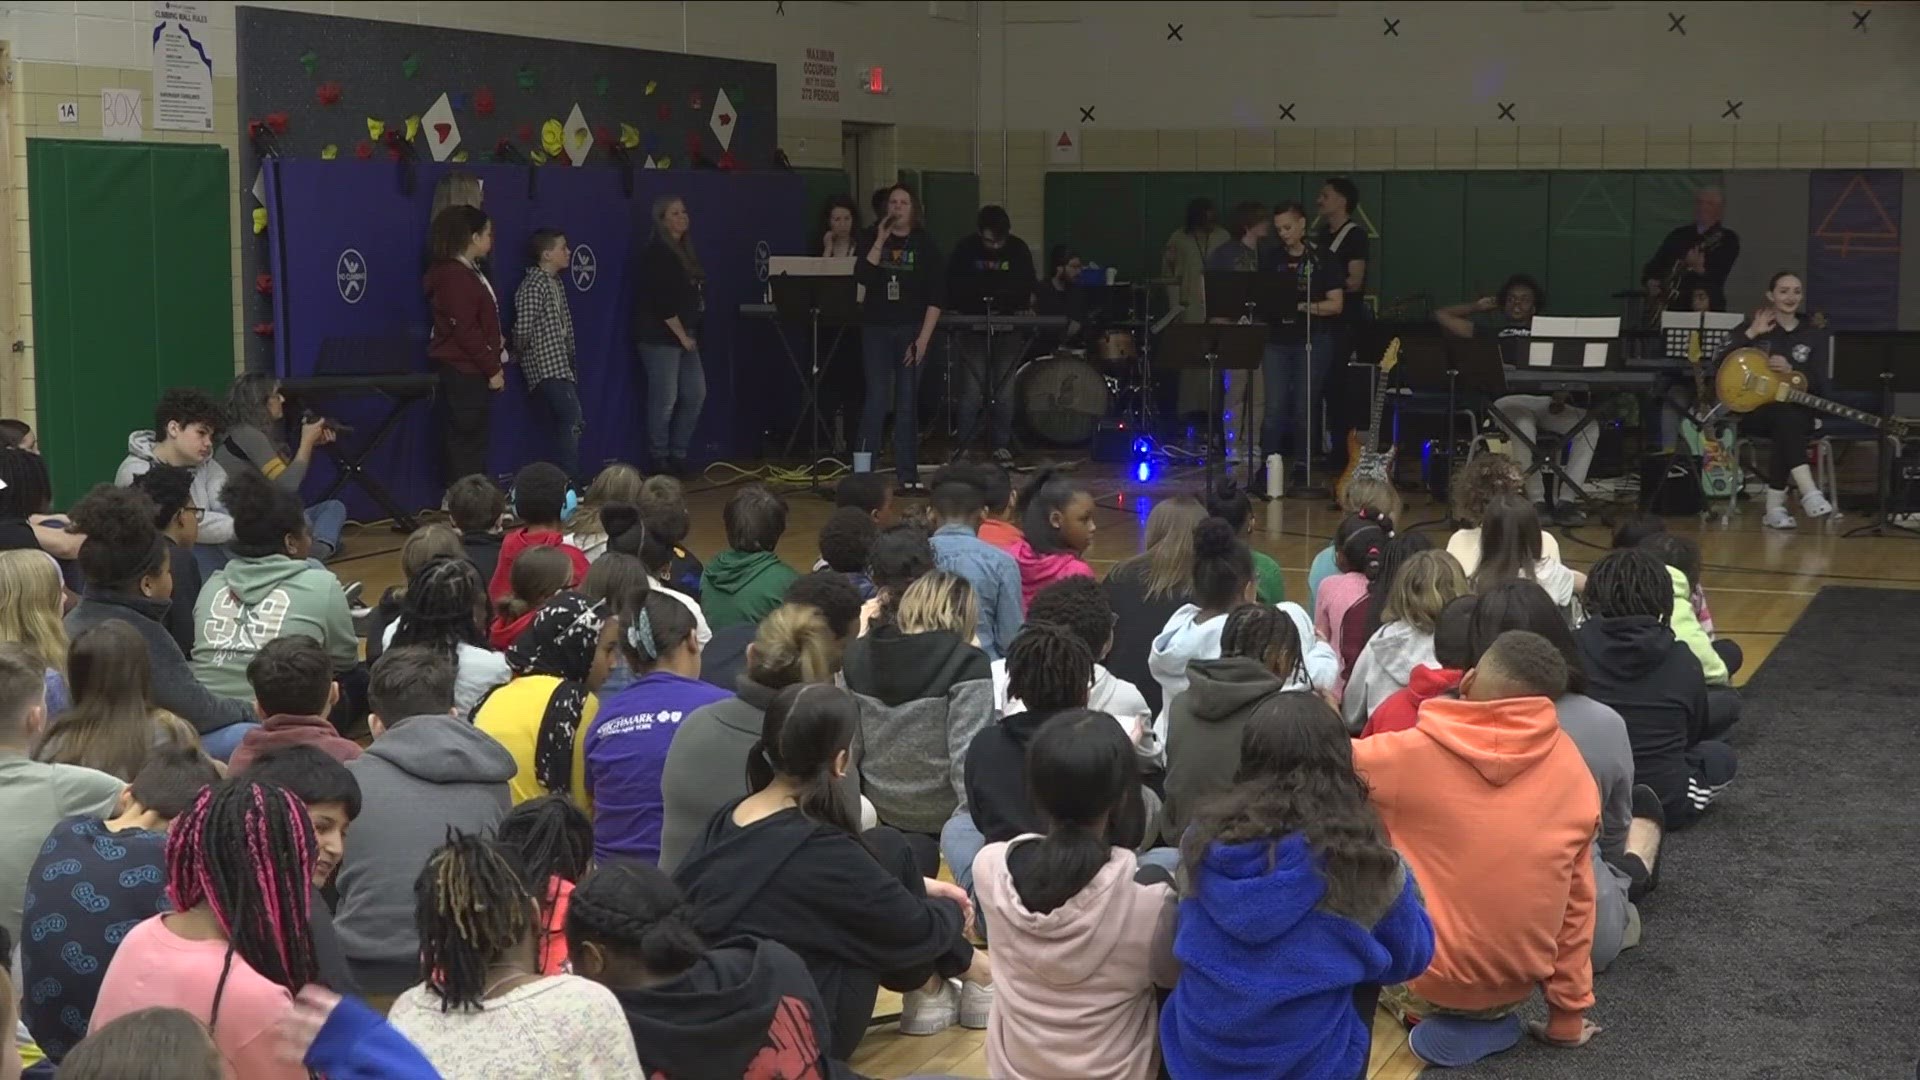 Elmwood Village Charter School students celebrating music at their first ever "Battle of the Bands" Thursday